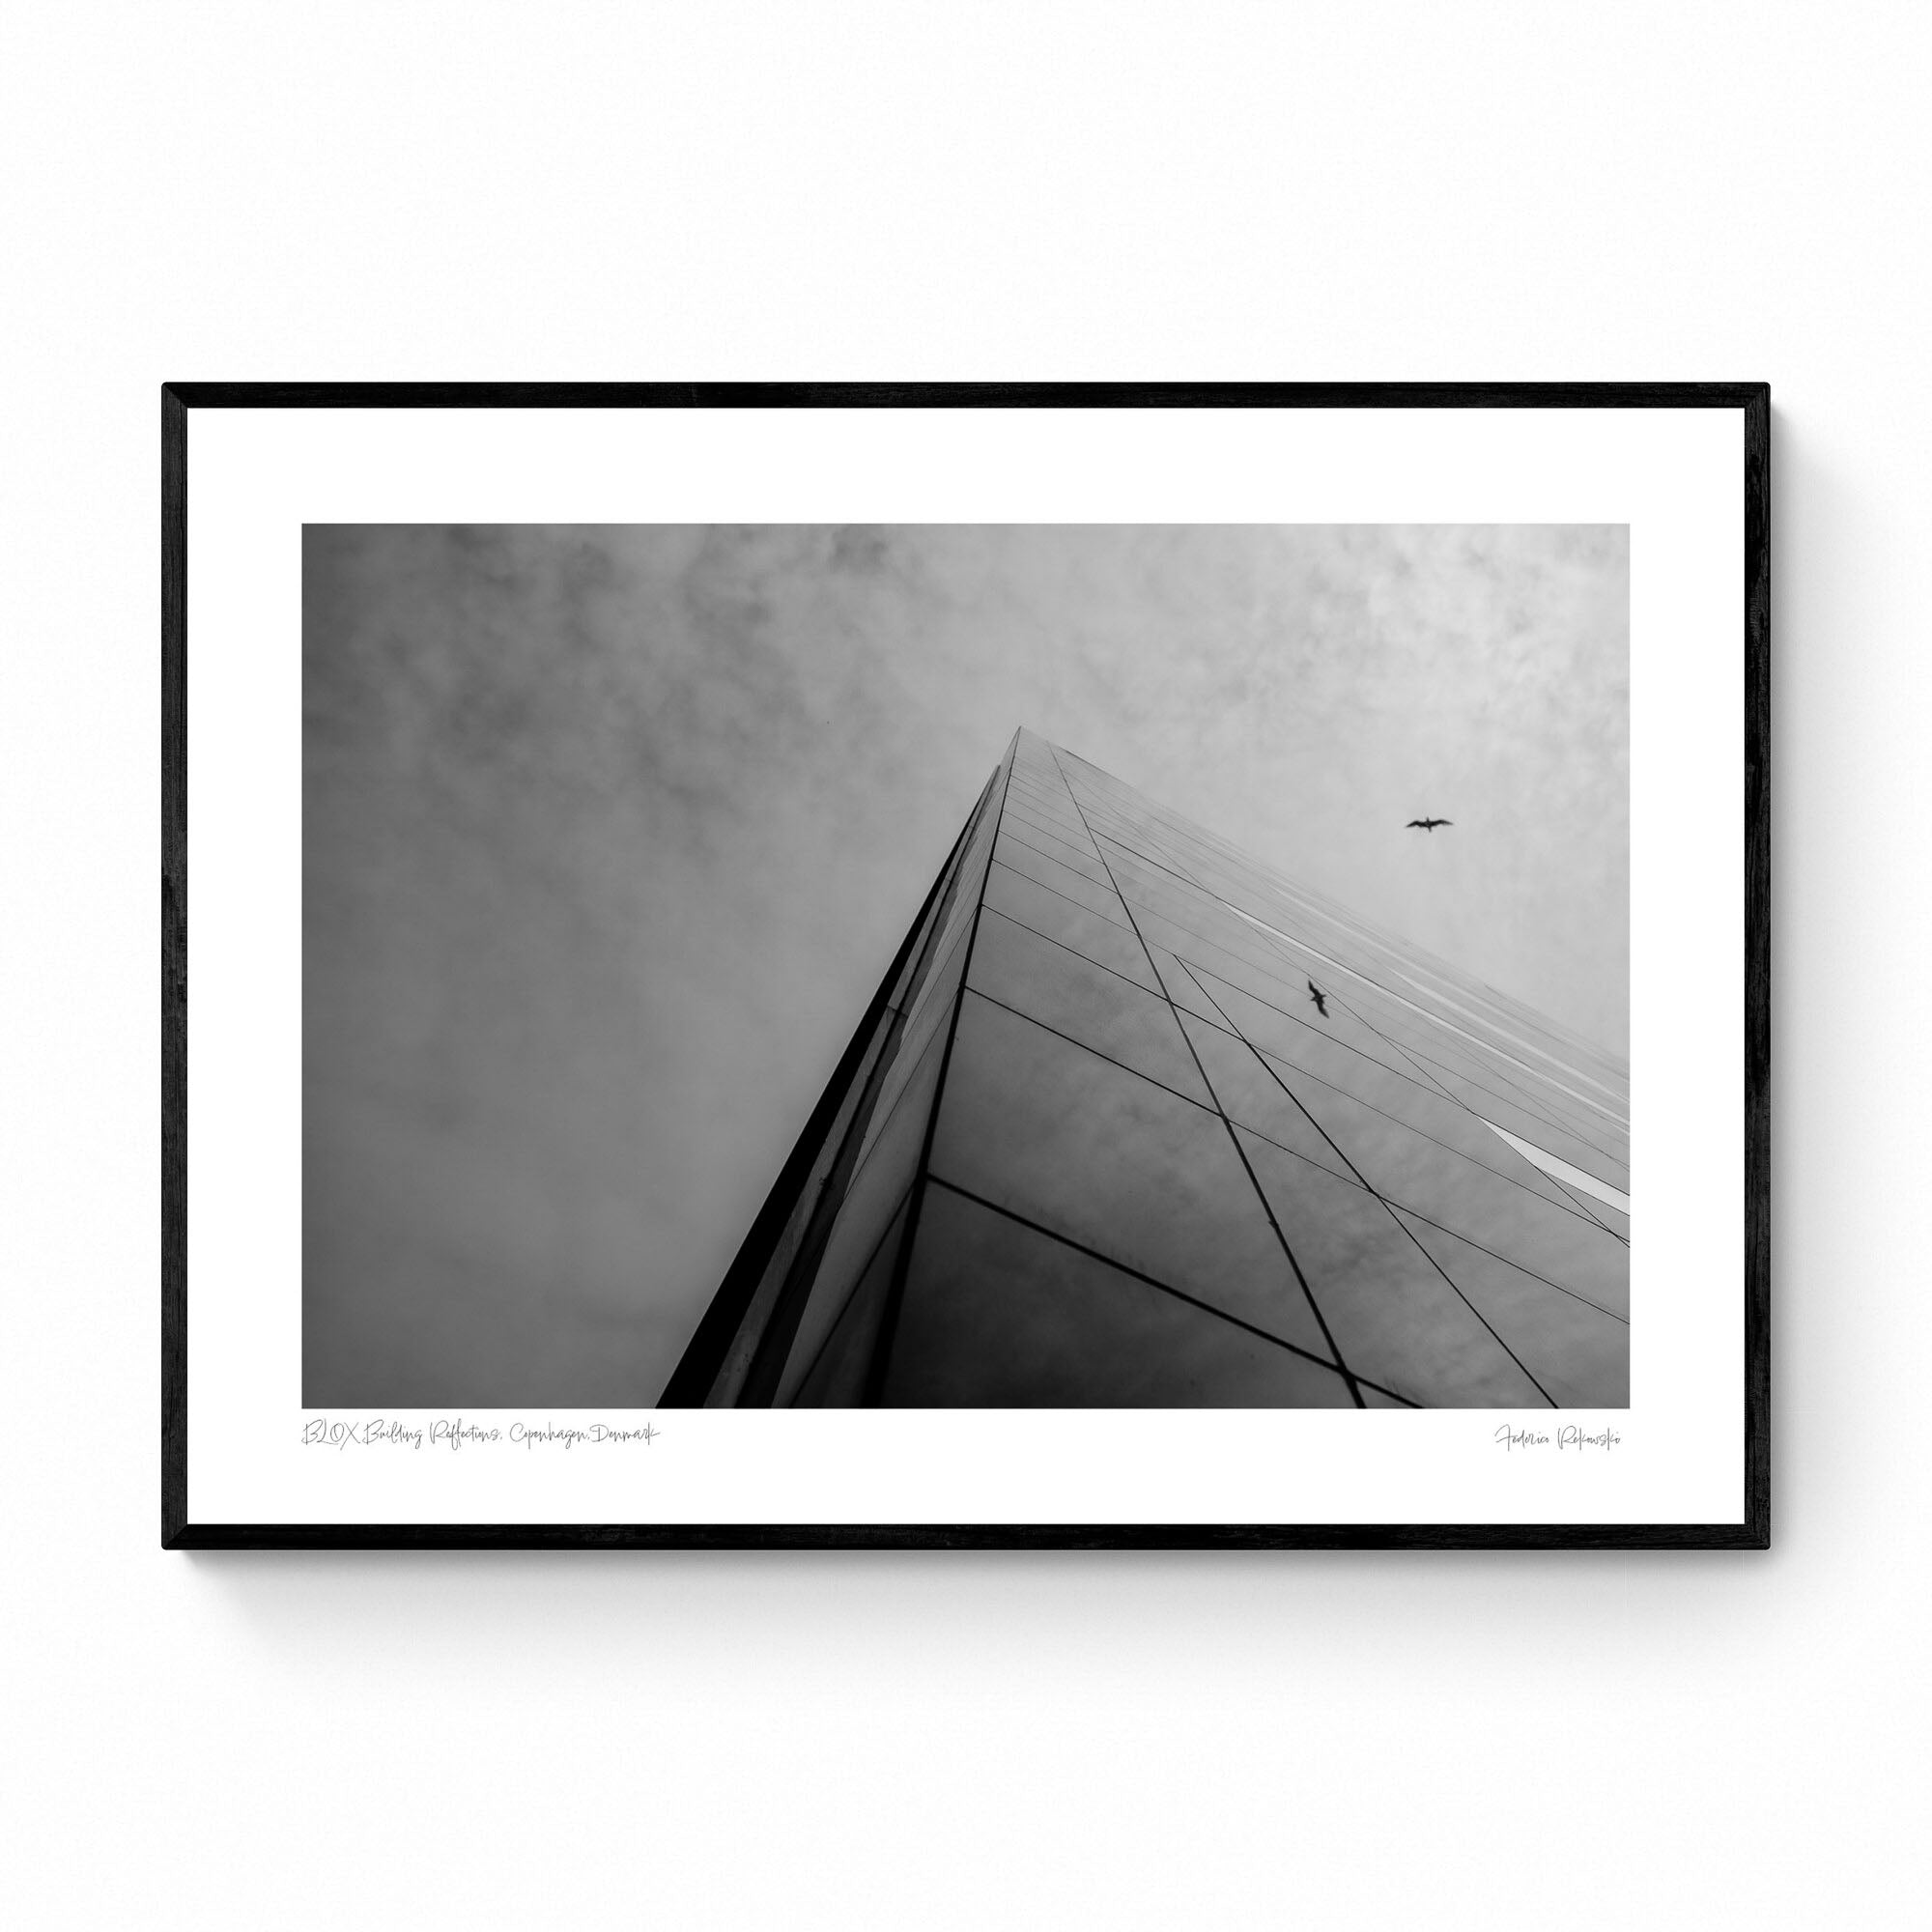 Black and white photograph of the BLOX building in Copenhagen with a bird flying overhead and reflections on the glass facade.